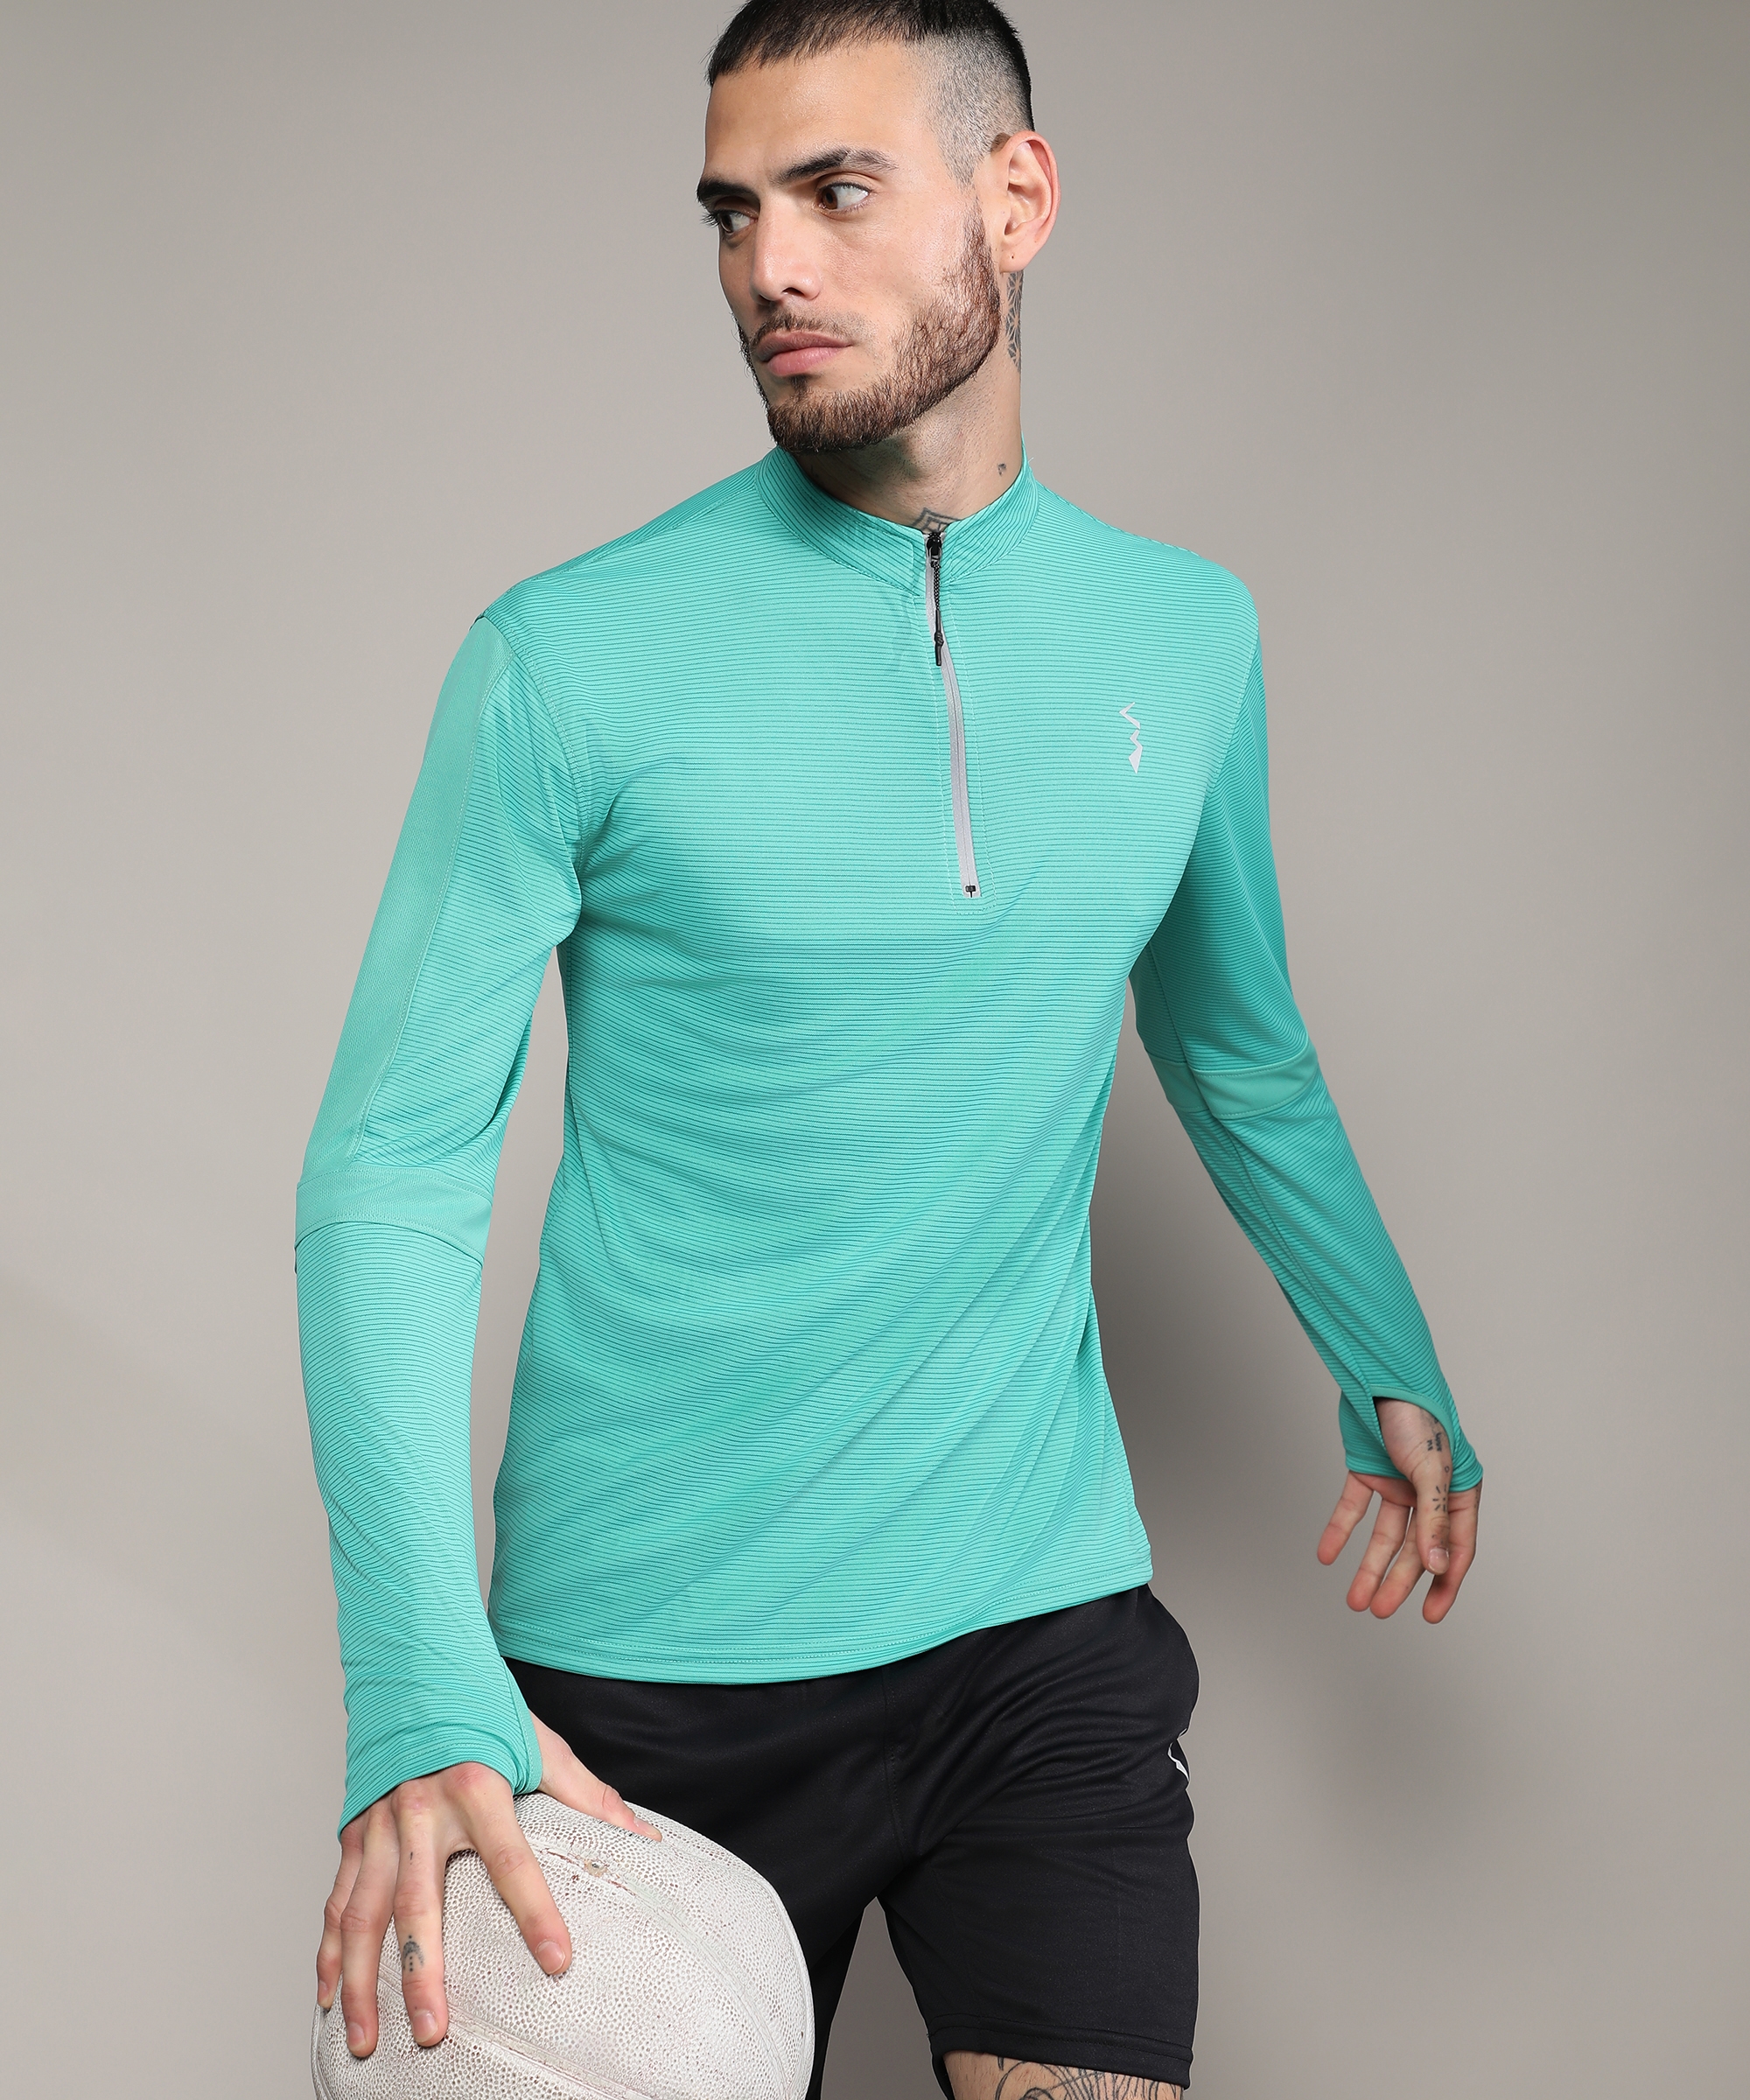 CAMPUS SUTRA | Men's Mint Green Solid Activewear T-Shirt